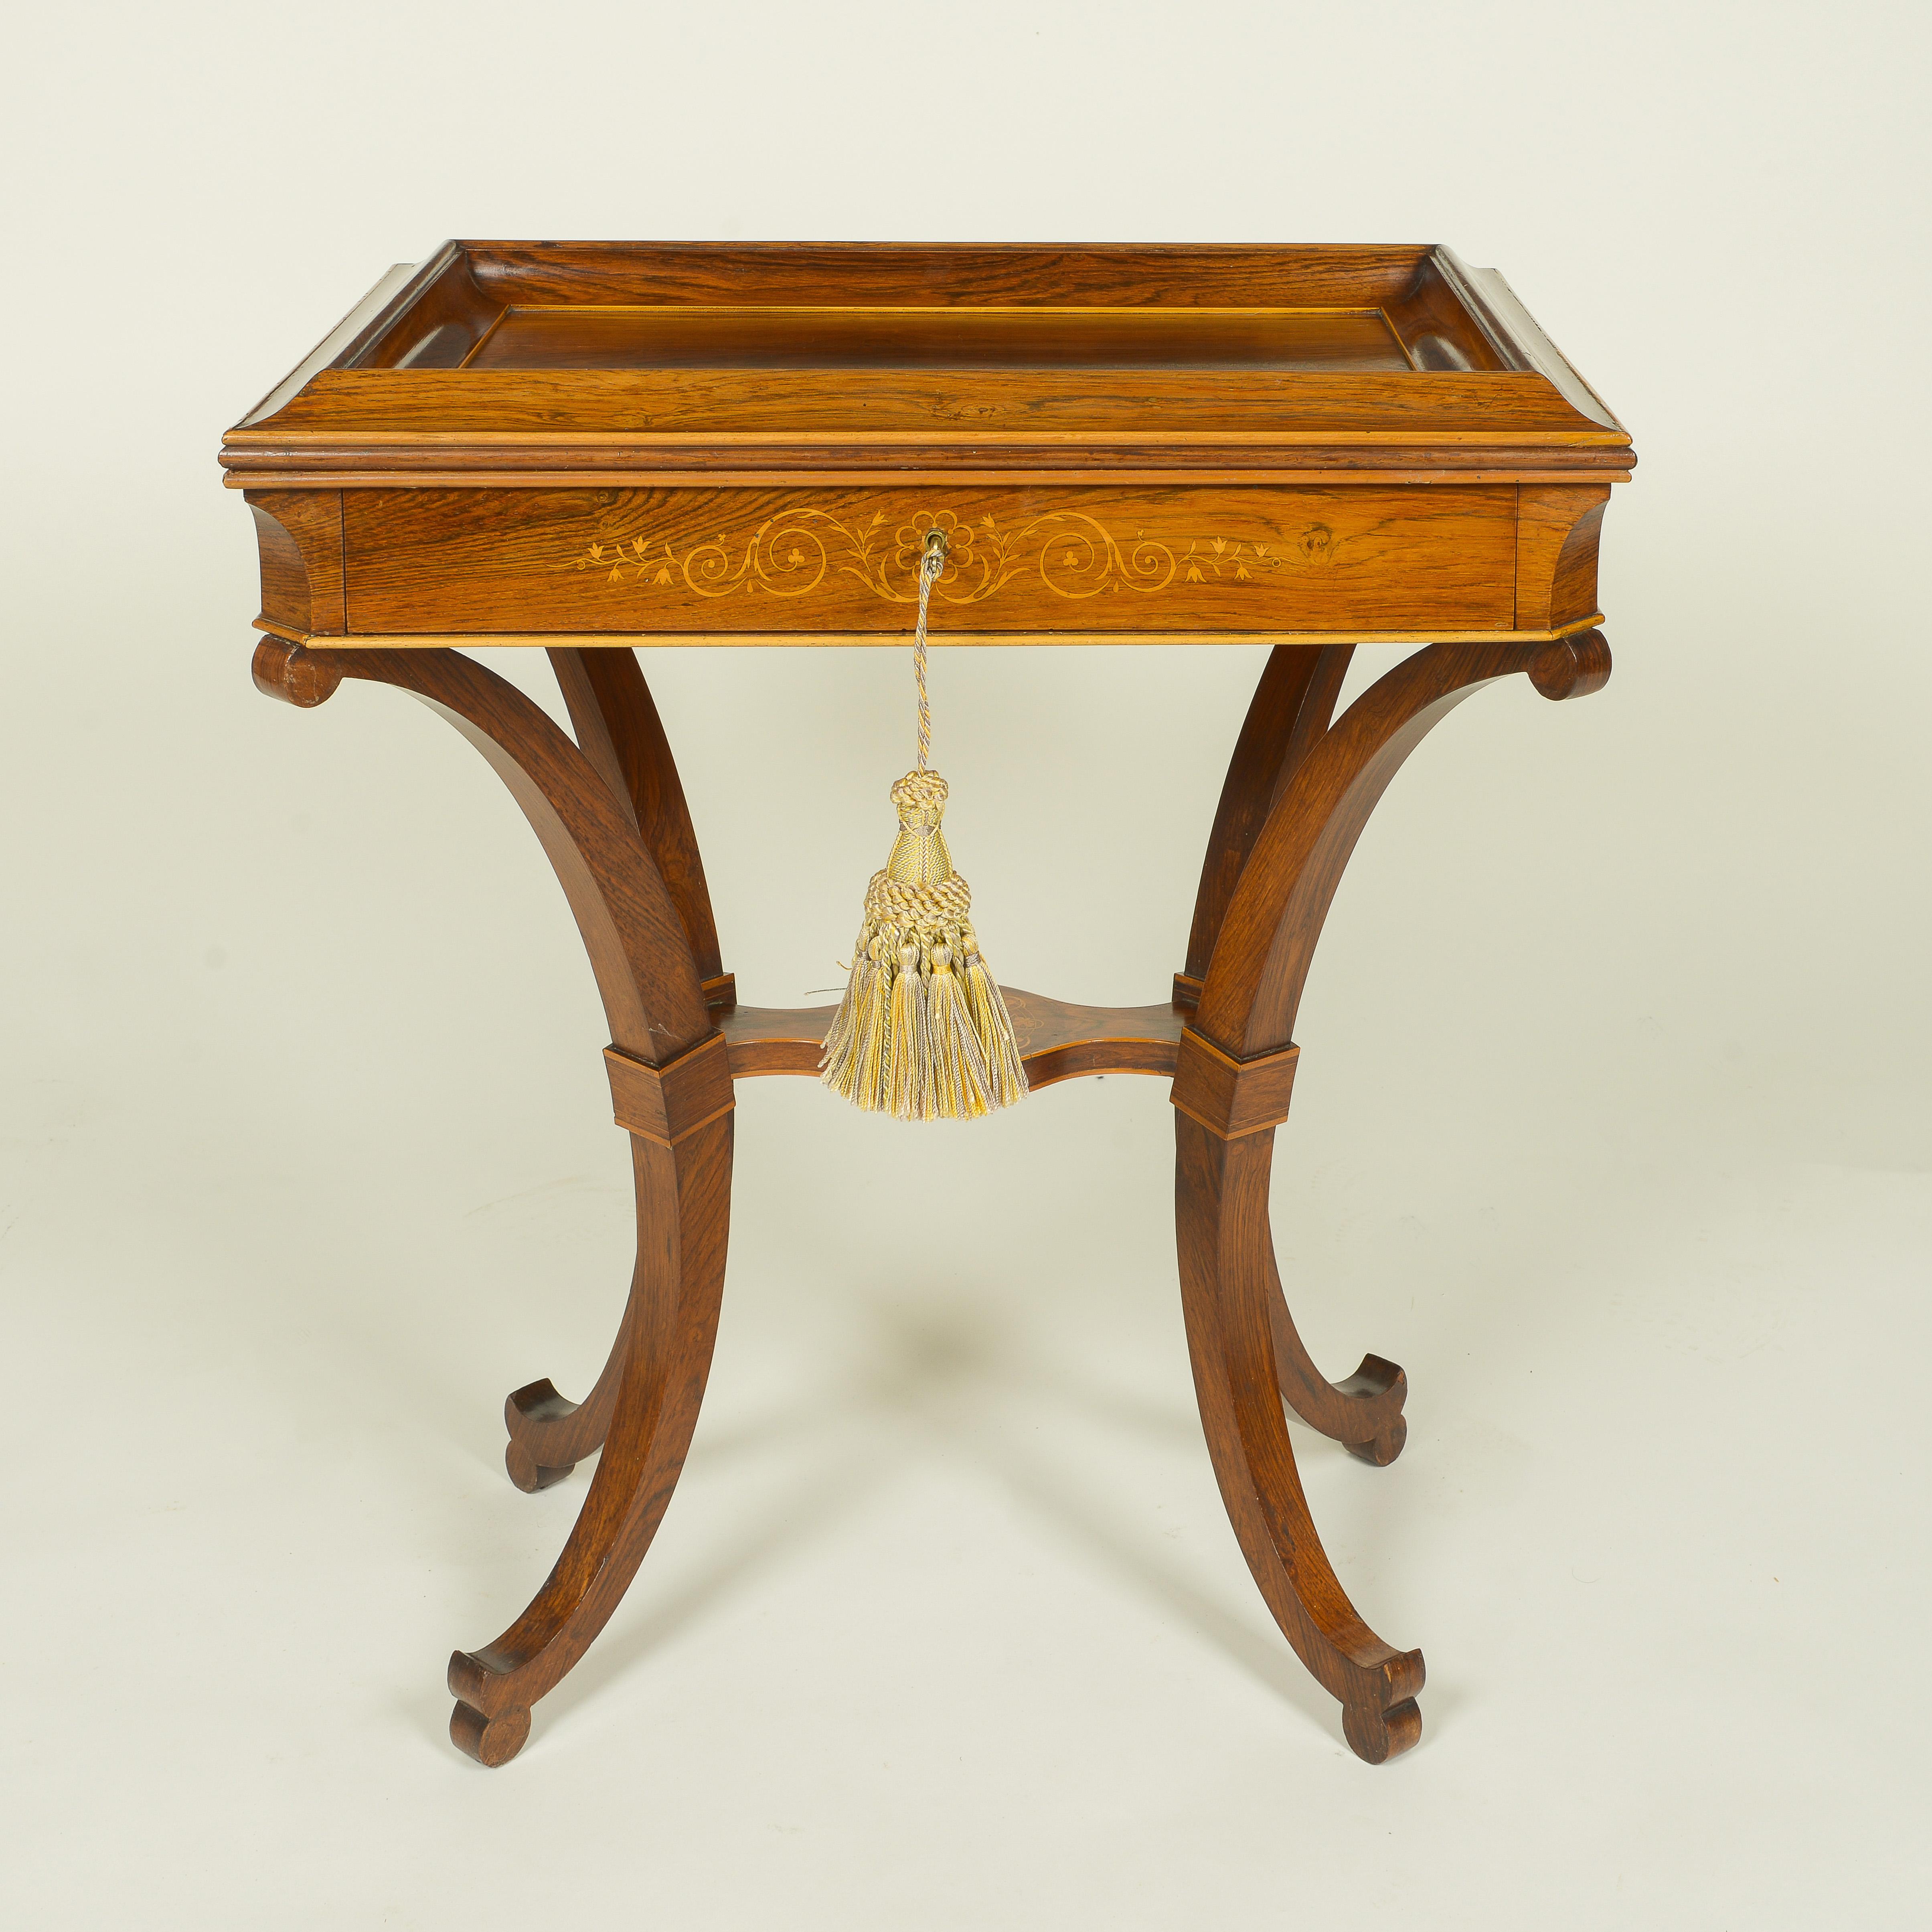 The rectangular top deeply dished with a cushion-molded edge, over a frieze drawer inlaid with arabesque scrollwork; raised on four incurved legs joined by a shaped inlaid platform stretcher; with fruitwood banding throughout. With key.